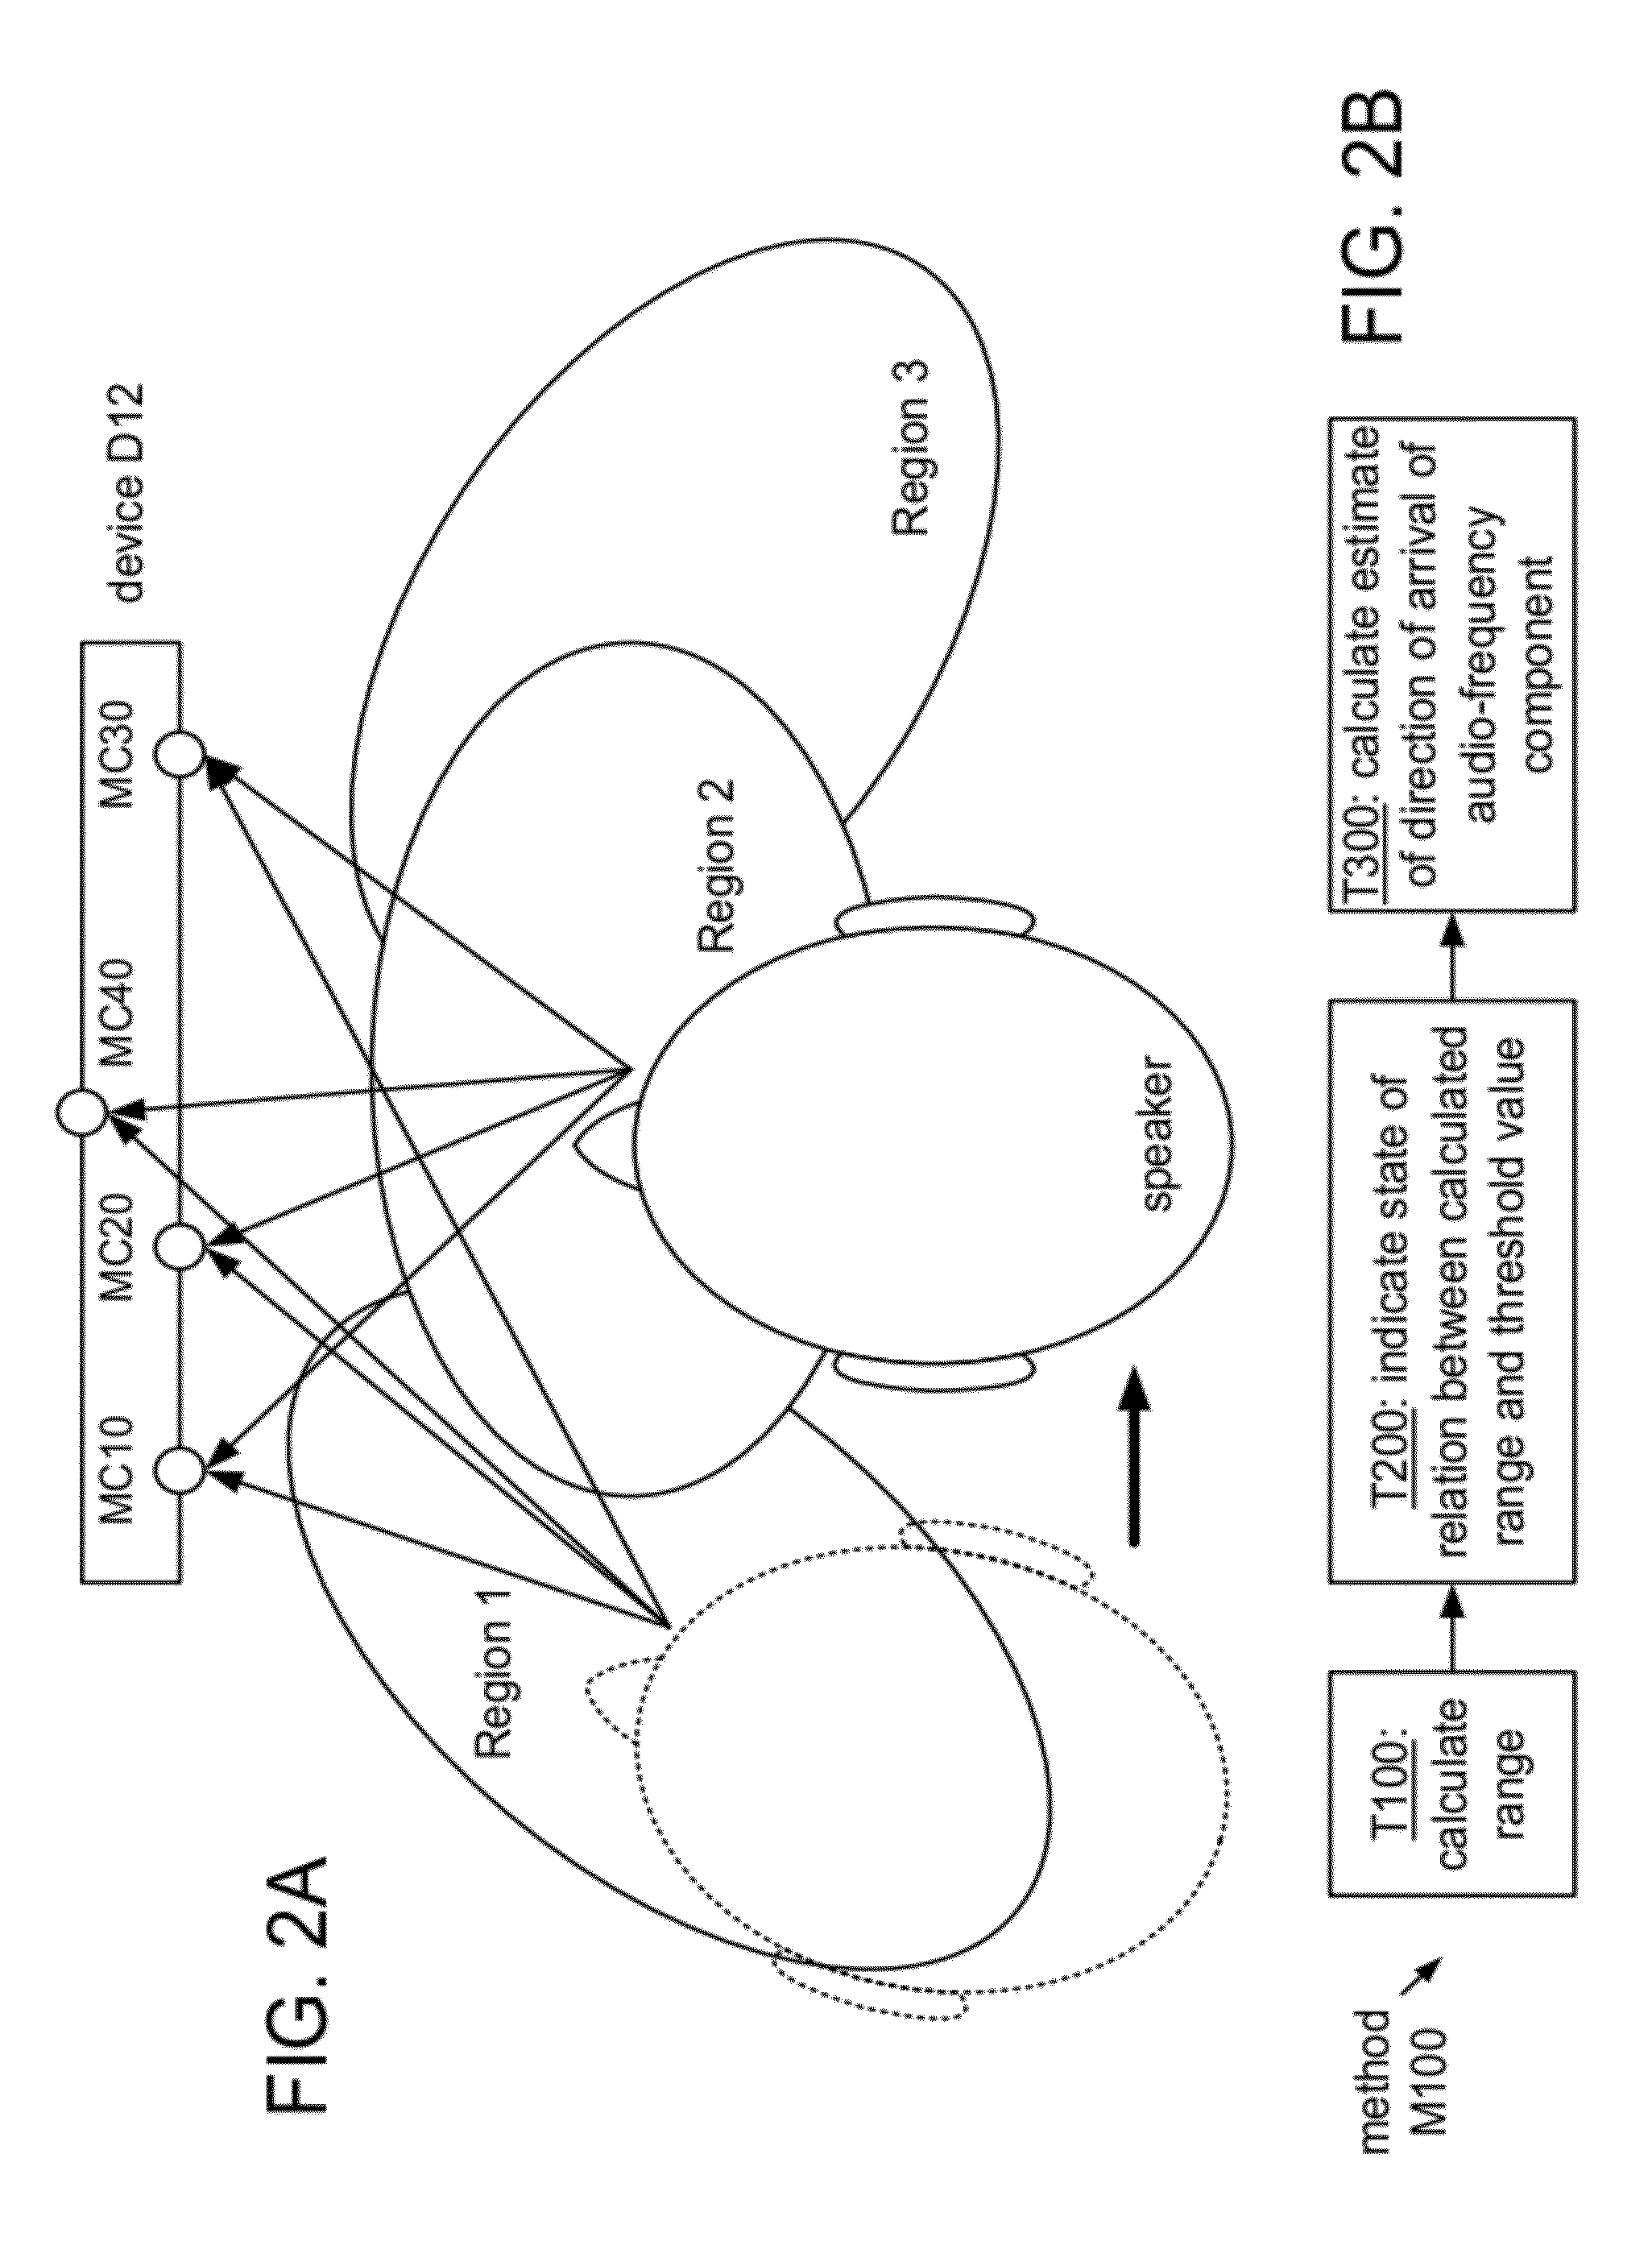 Systems, methods, apparatus, and computer-readable media for source localization using audible sound and ultrasound